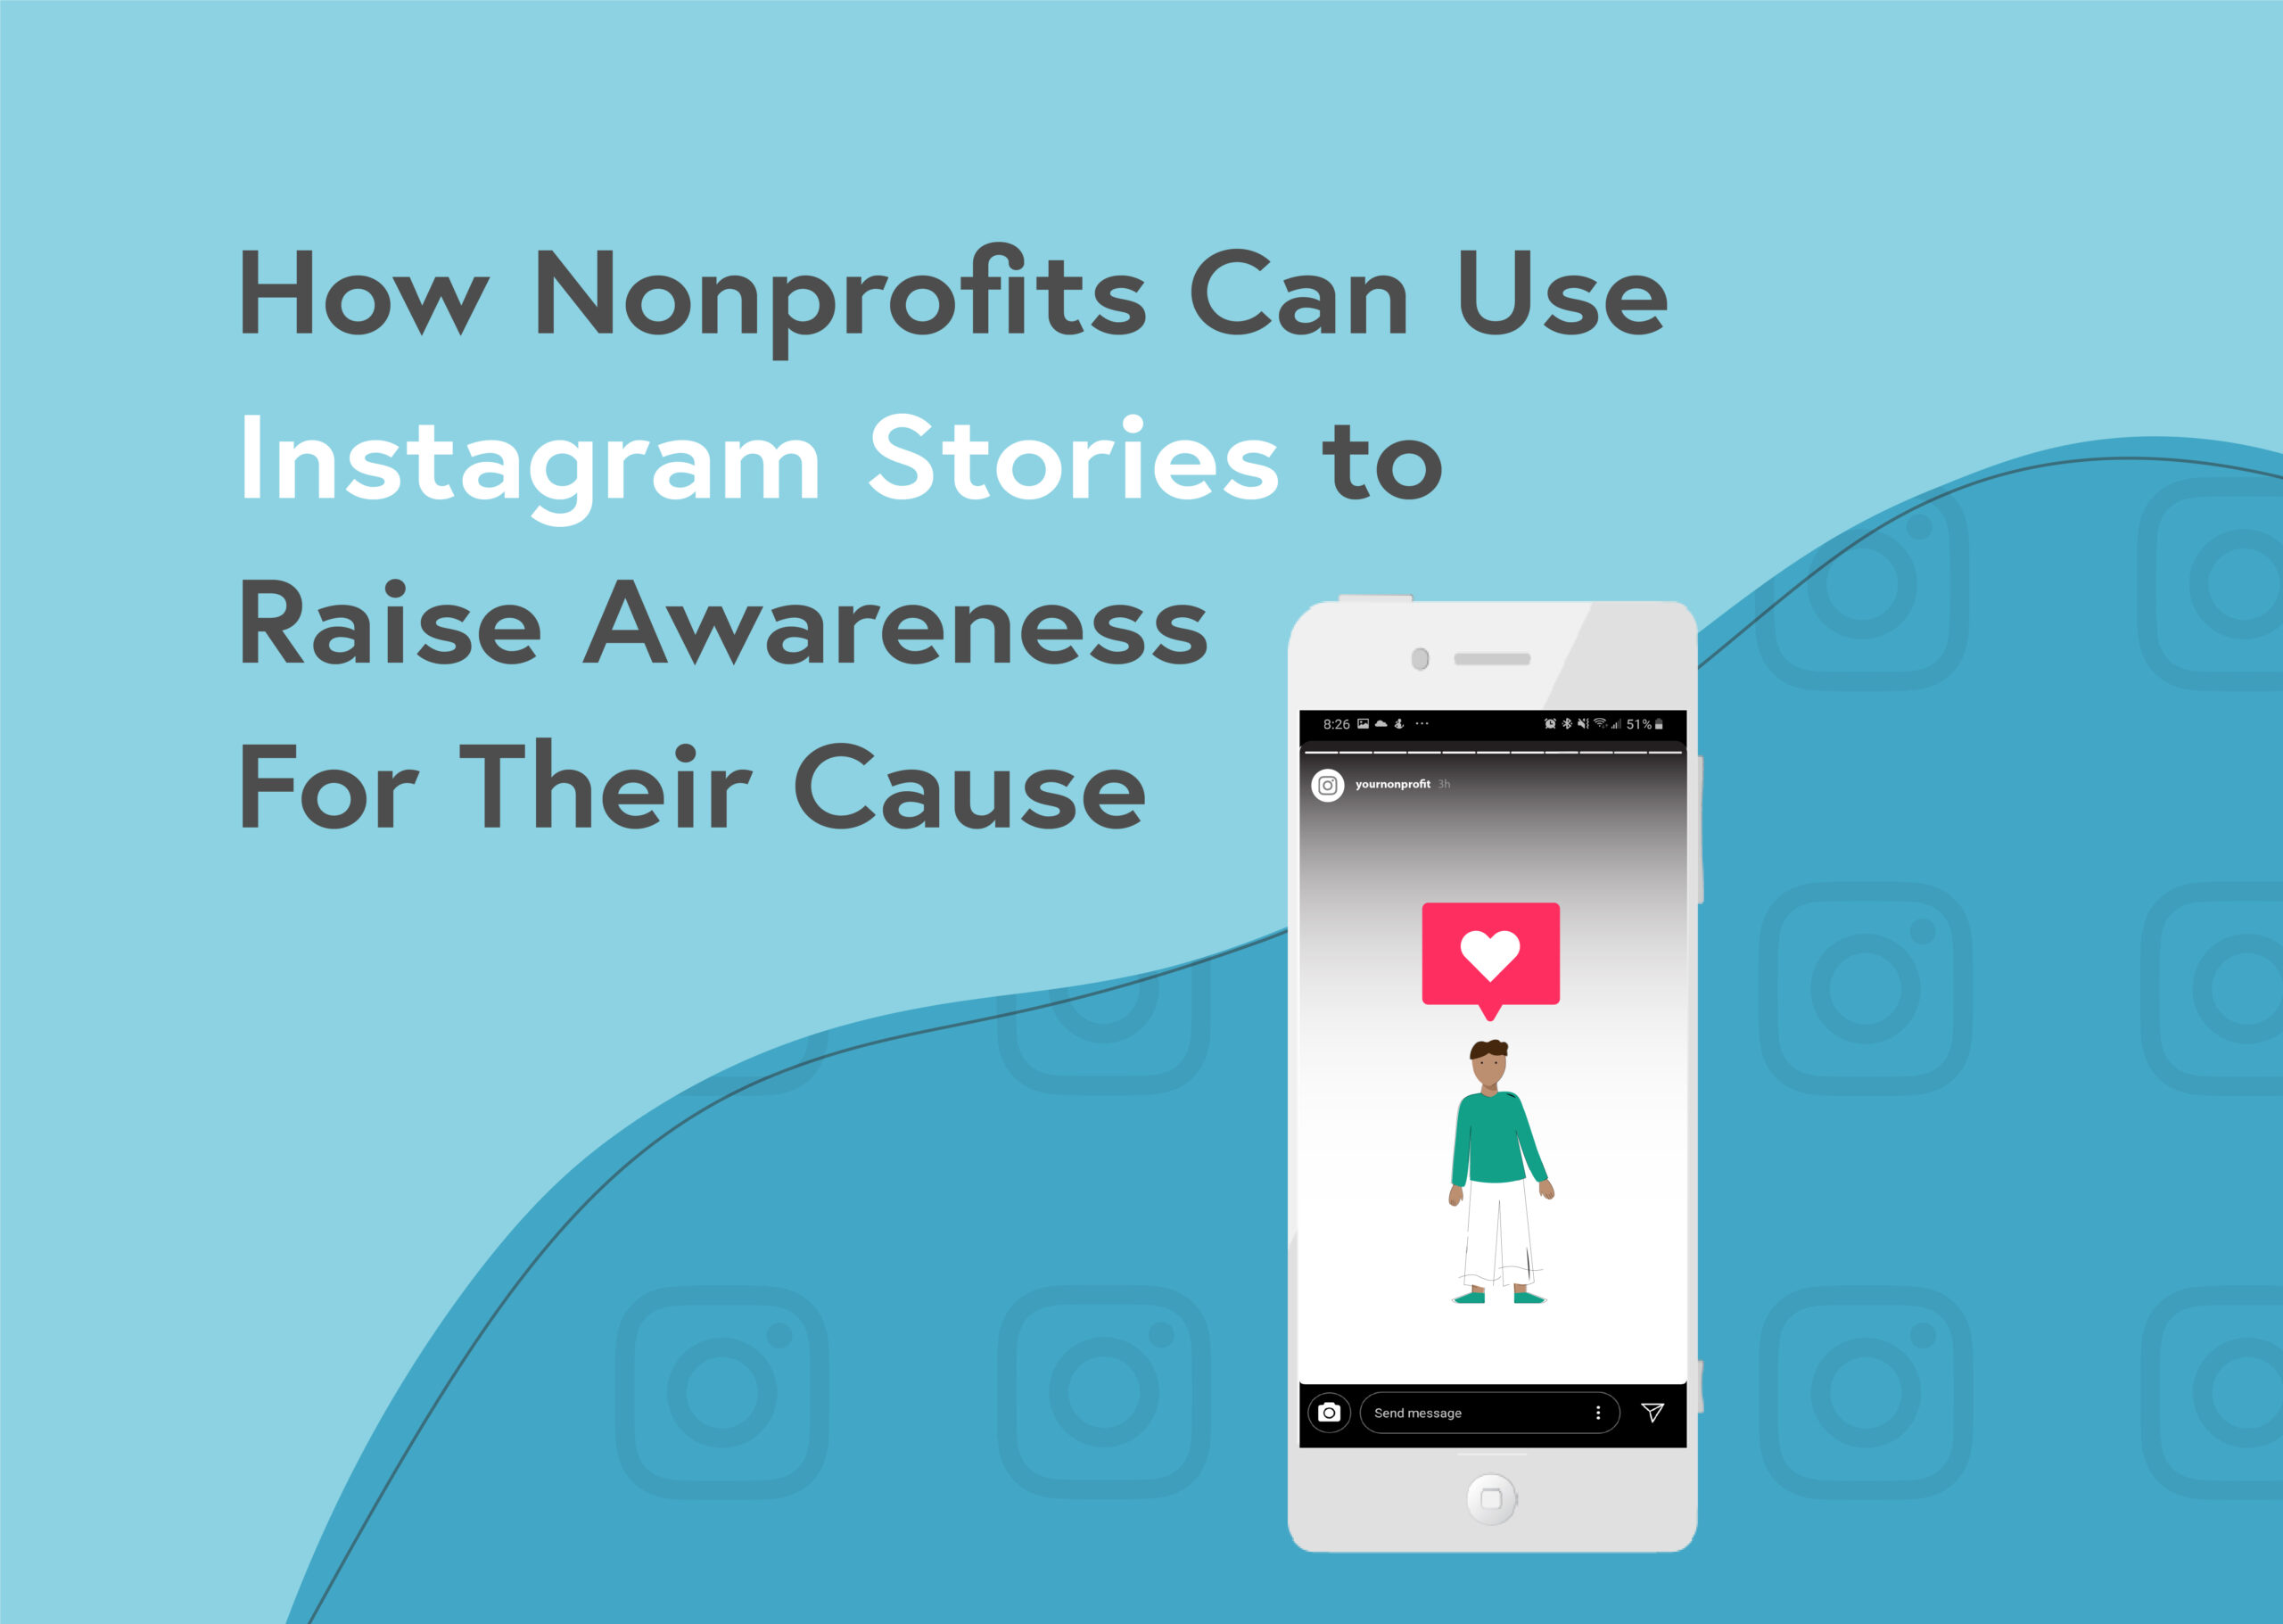 How Nonprofits Can Use Instagram Stories to Raise Awareness For Their Cause